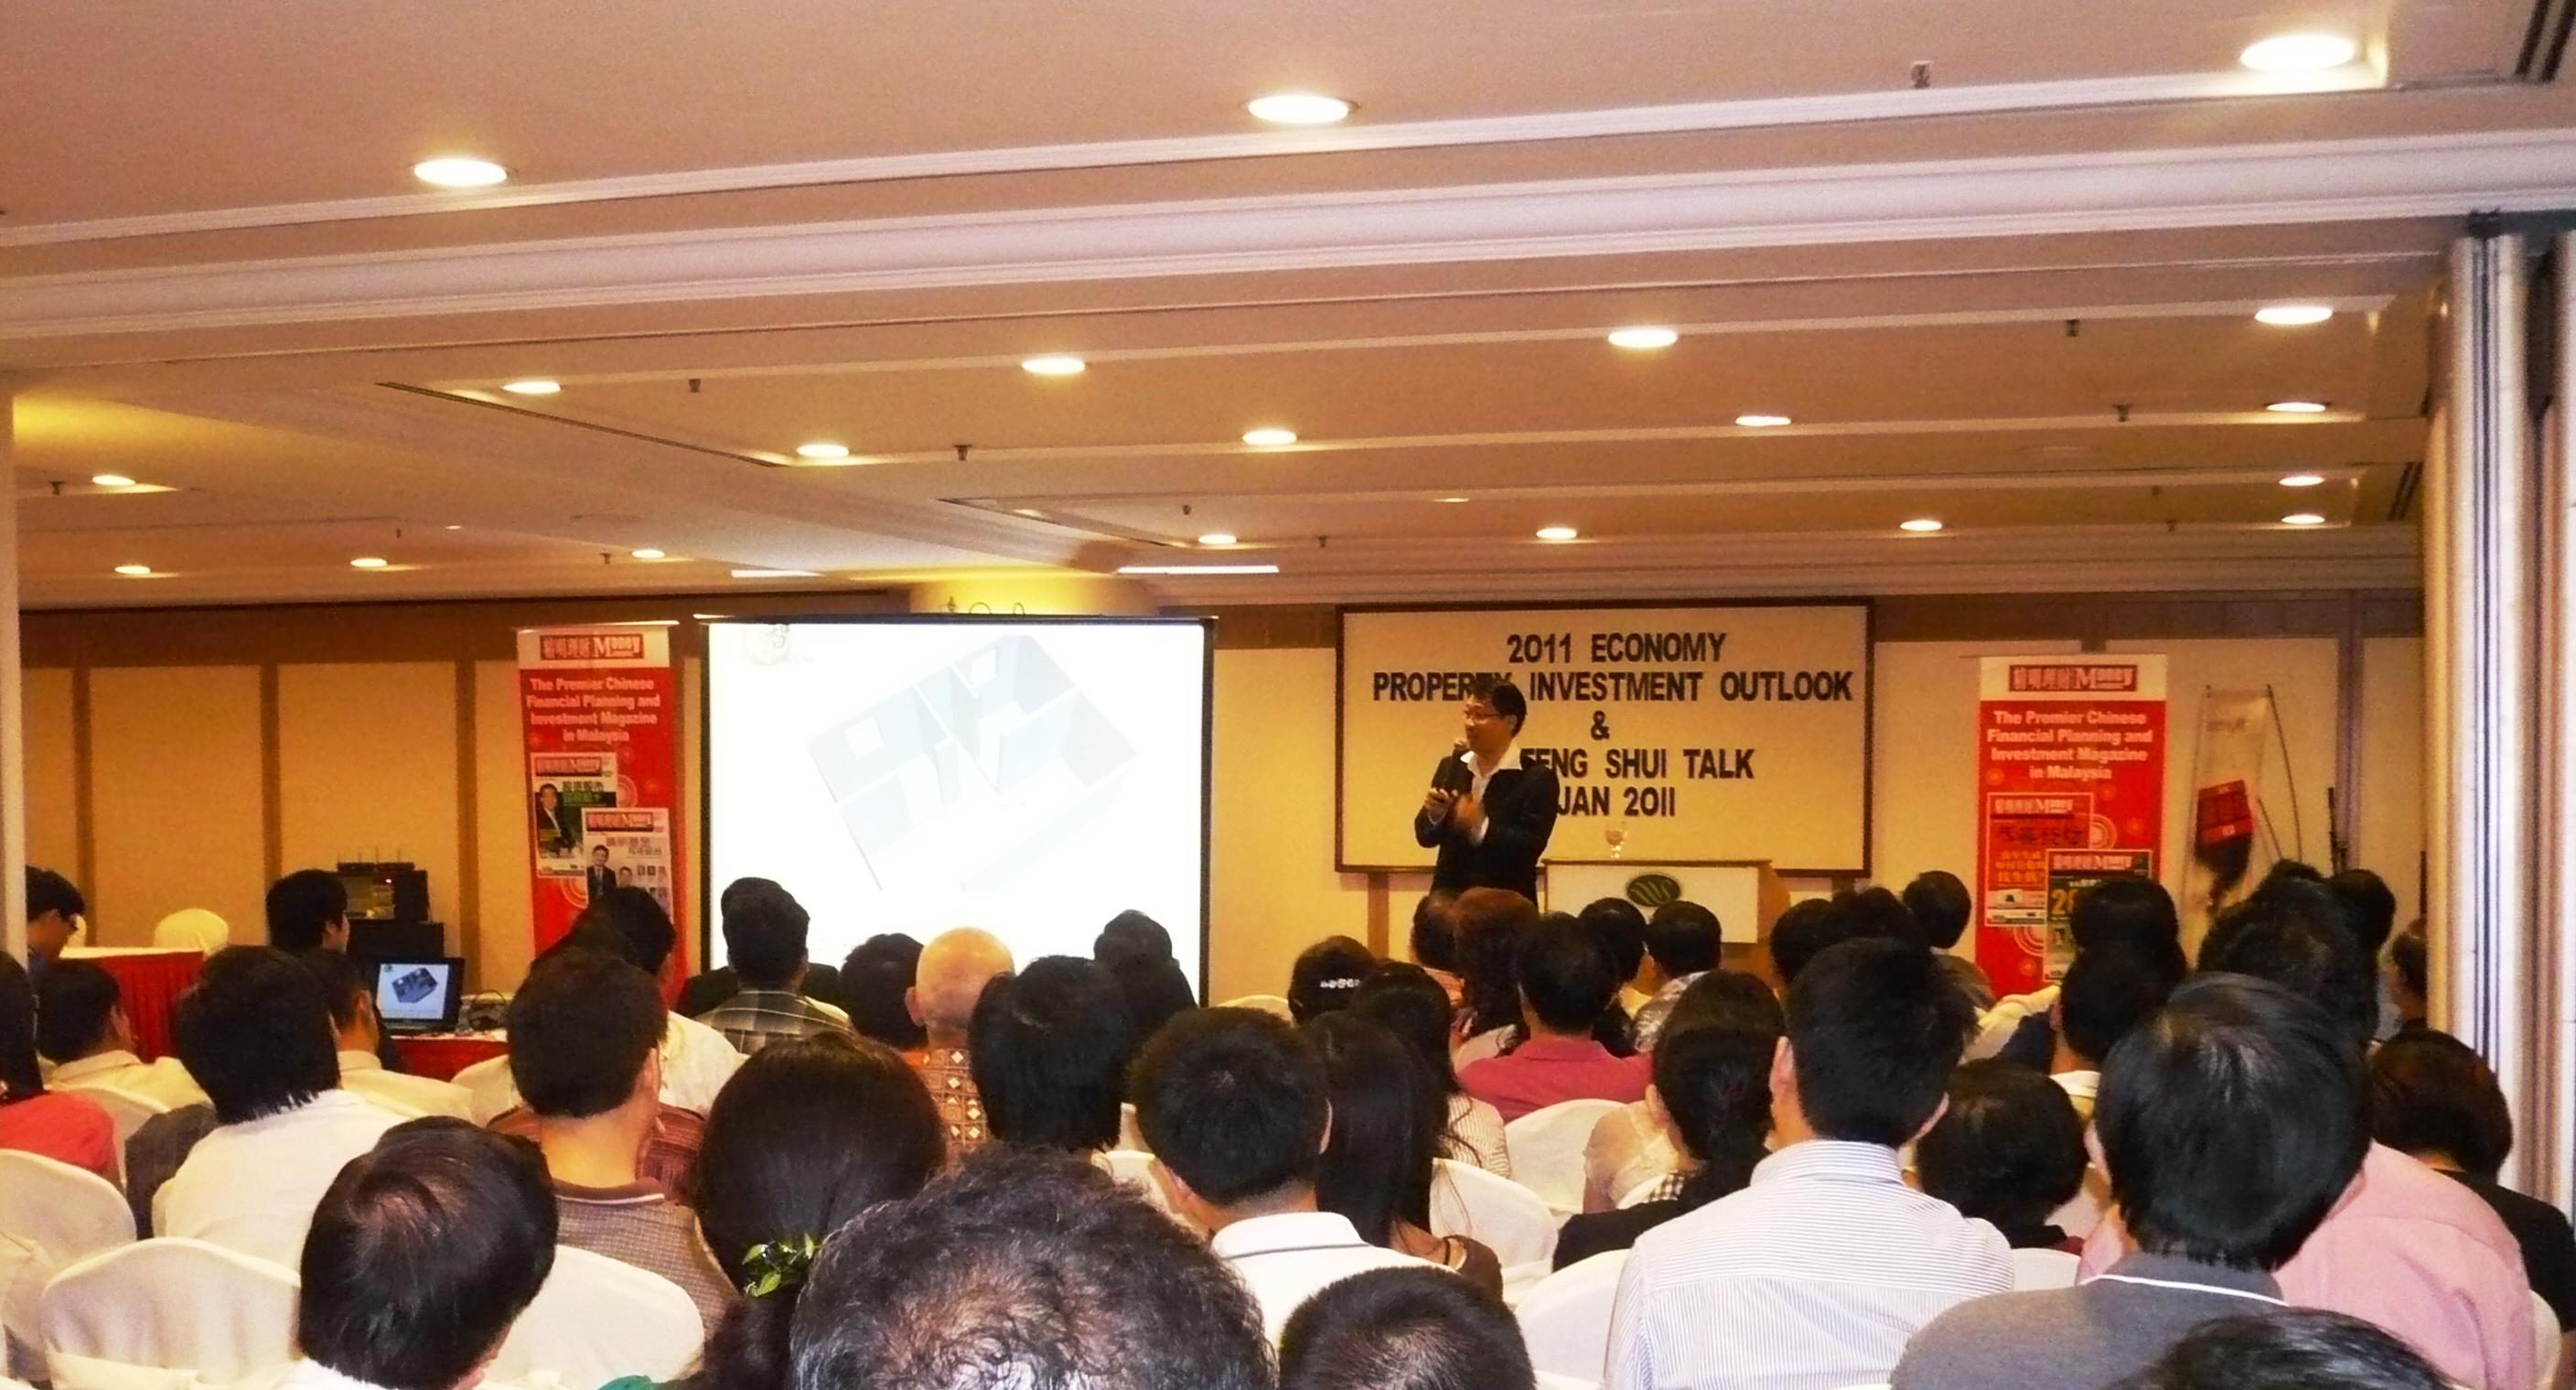 Master Soon at Sunway Hotel for Feng Shui Talk 2011. Sponsored by Red Tone and Organized By Money Compass